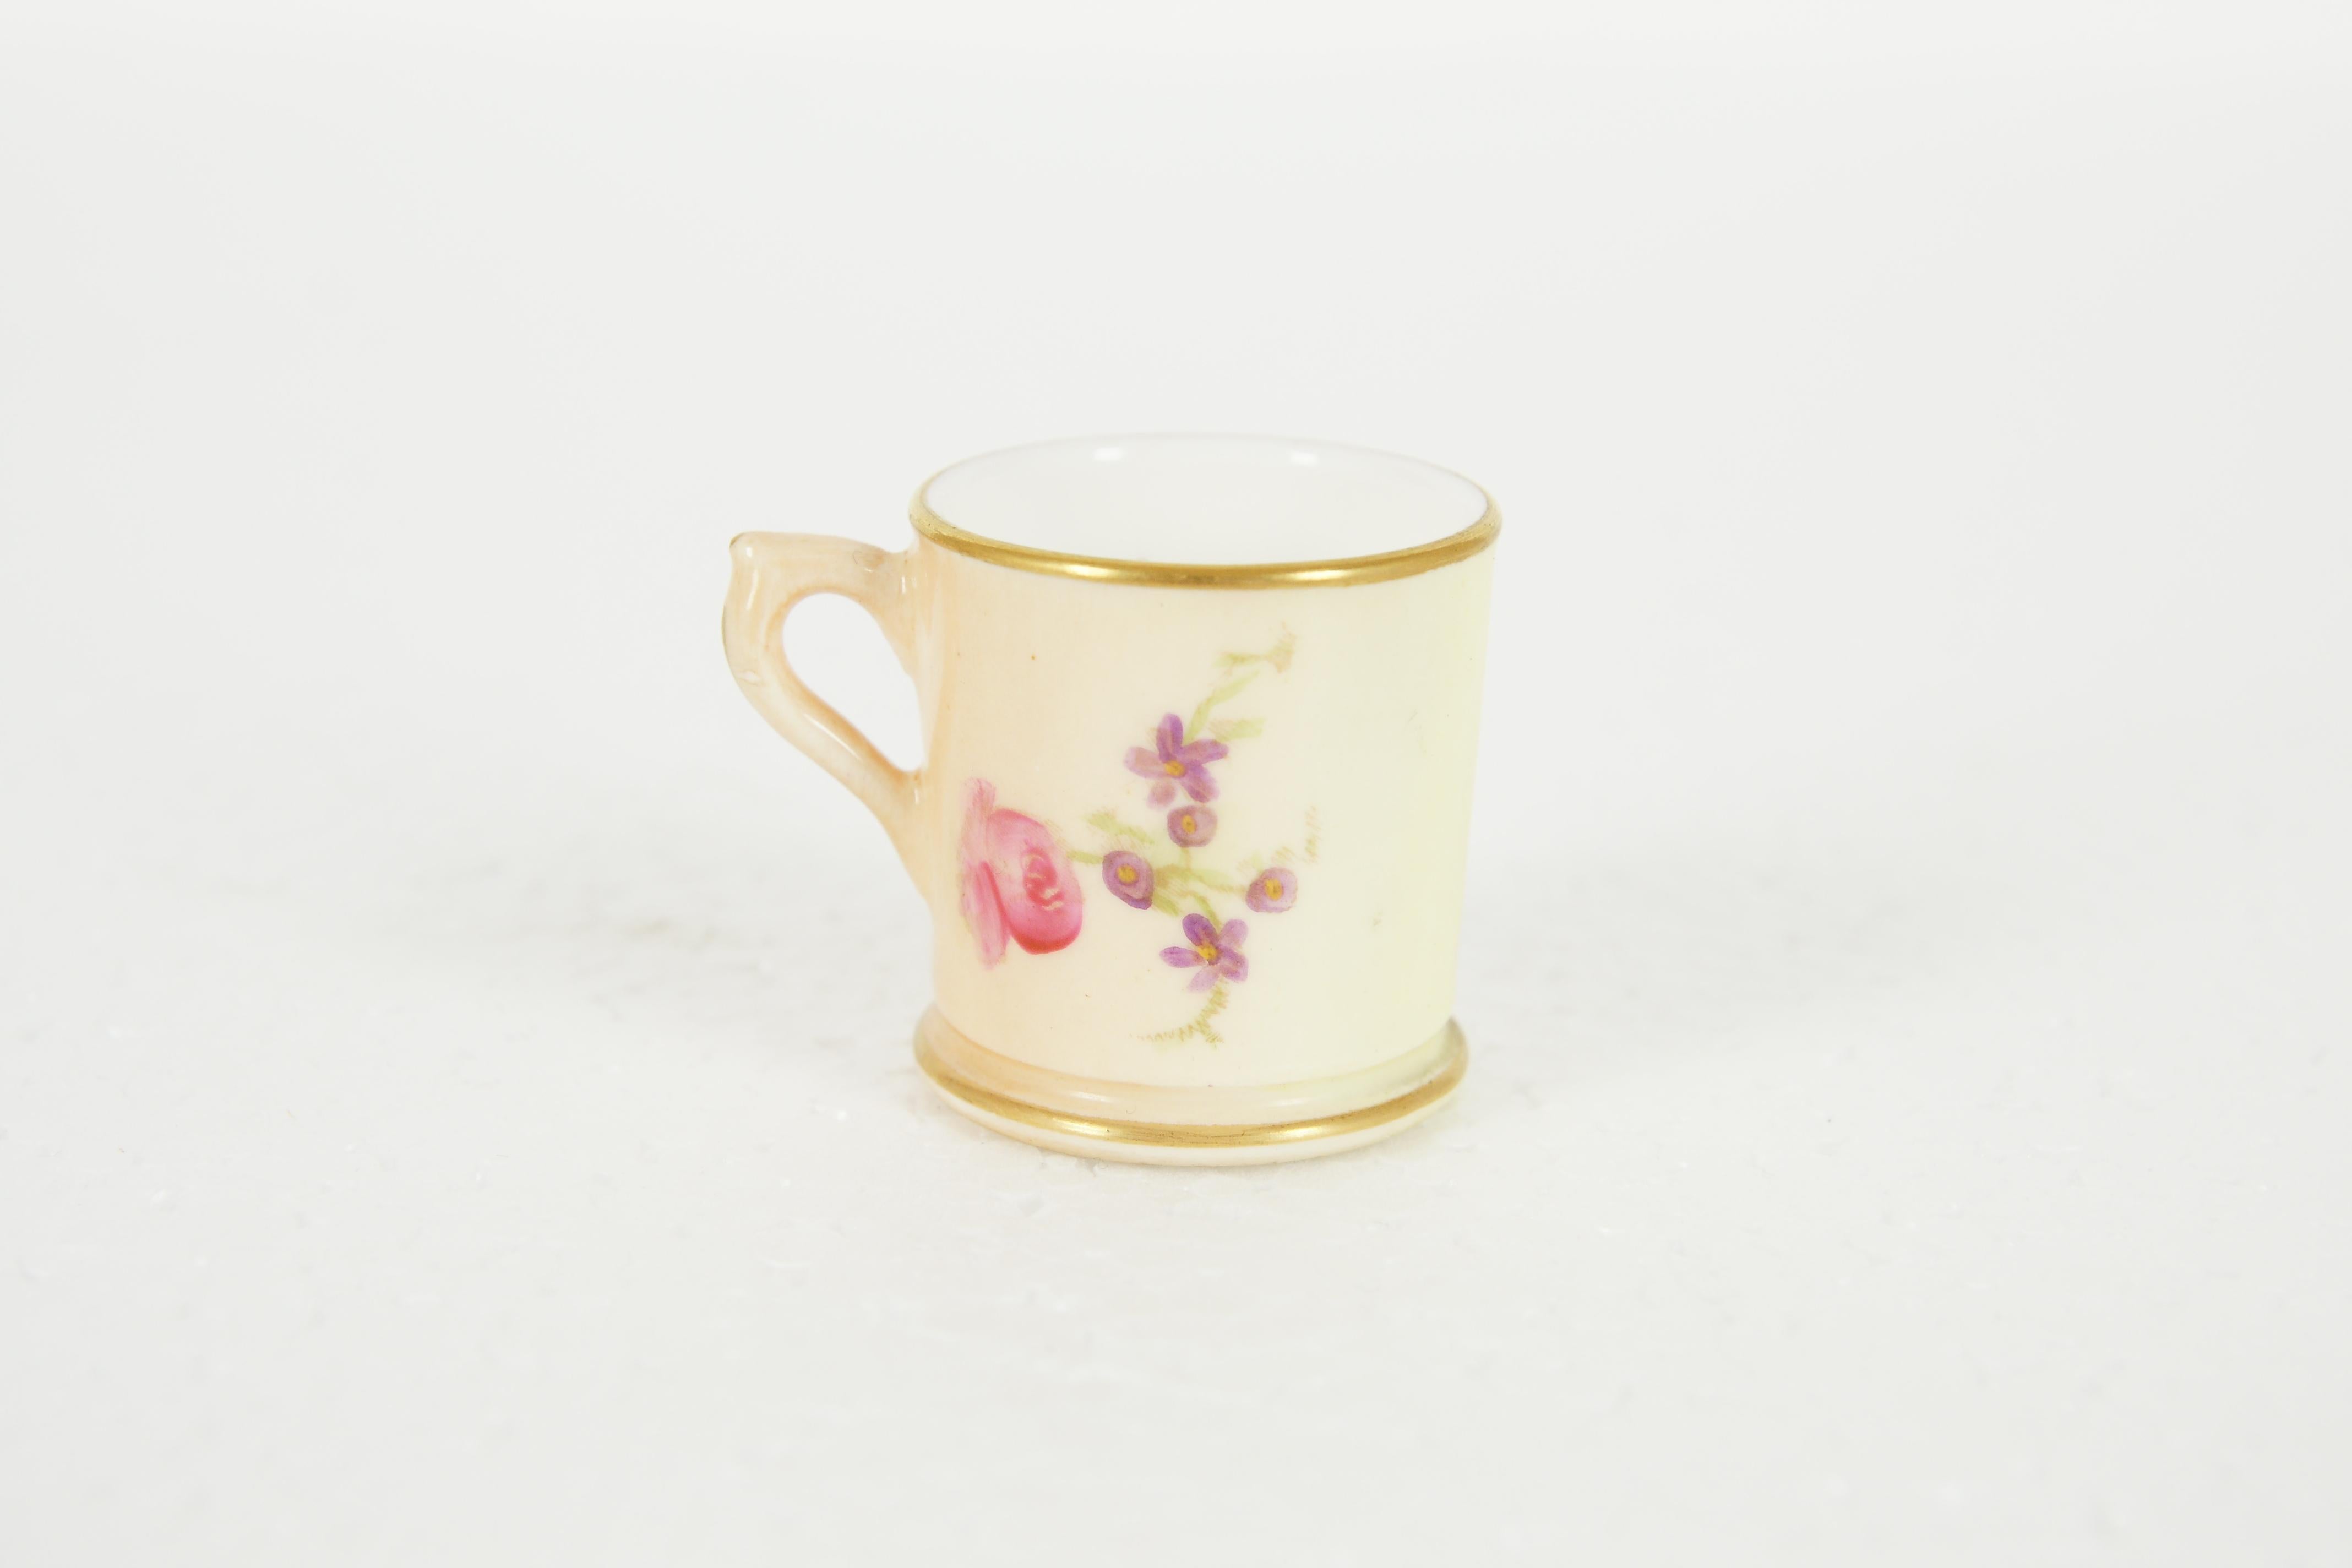 Antique Royal Worcester, miniature hand painted cup, B1964

Hand painted florals on peach ground
In good condition

B1962

Measures: 1 3/4